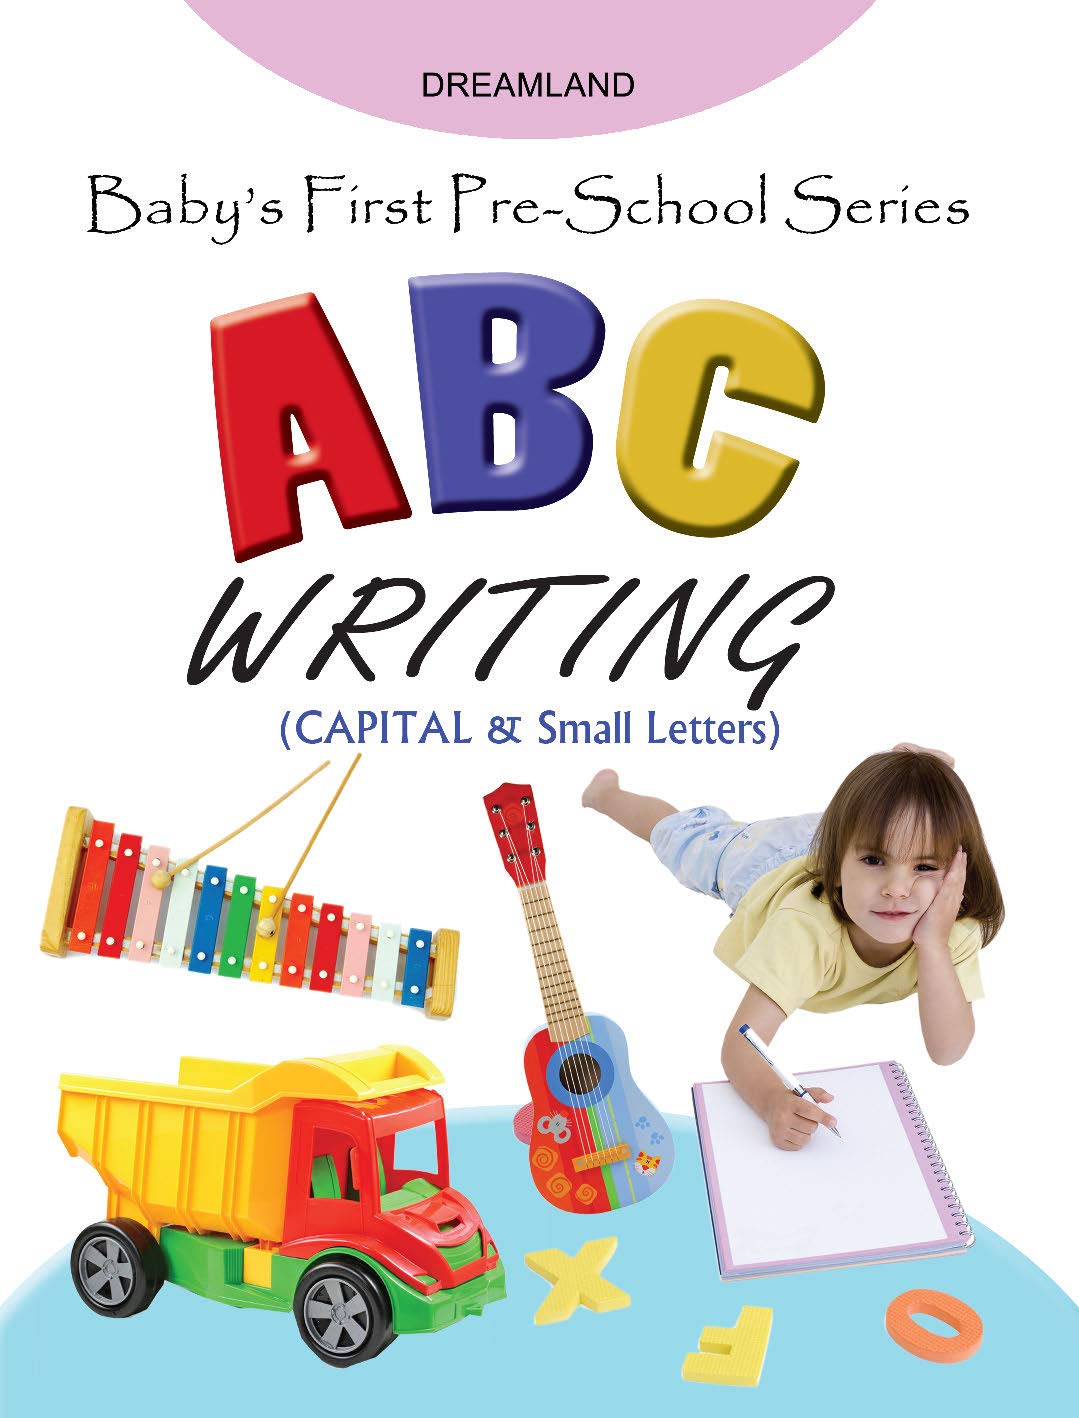 Baby's First Pre-School Series: ABC Writing (CAPITAL & Small Letters)